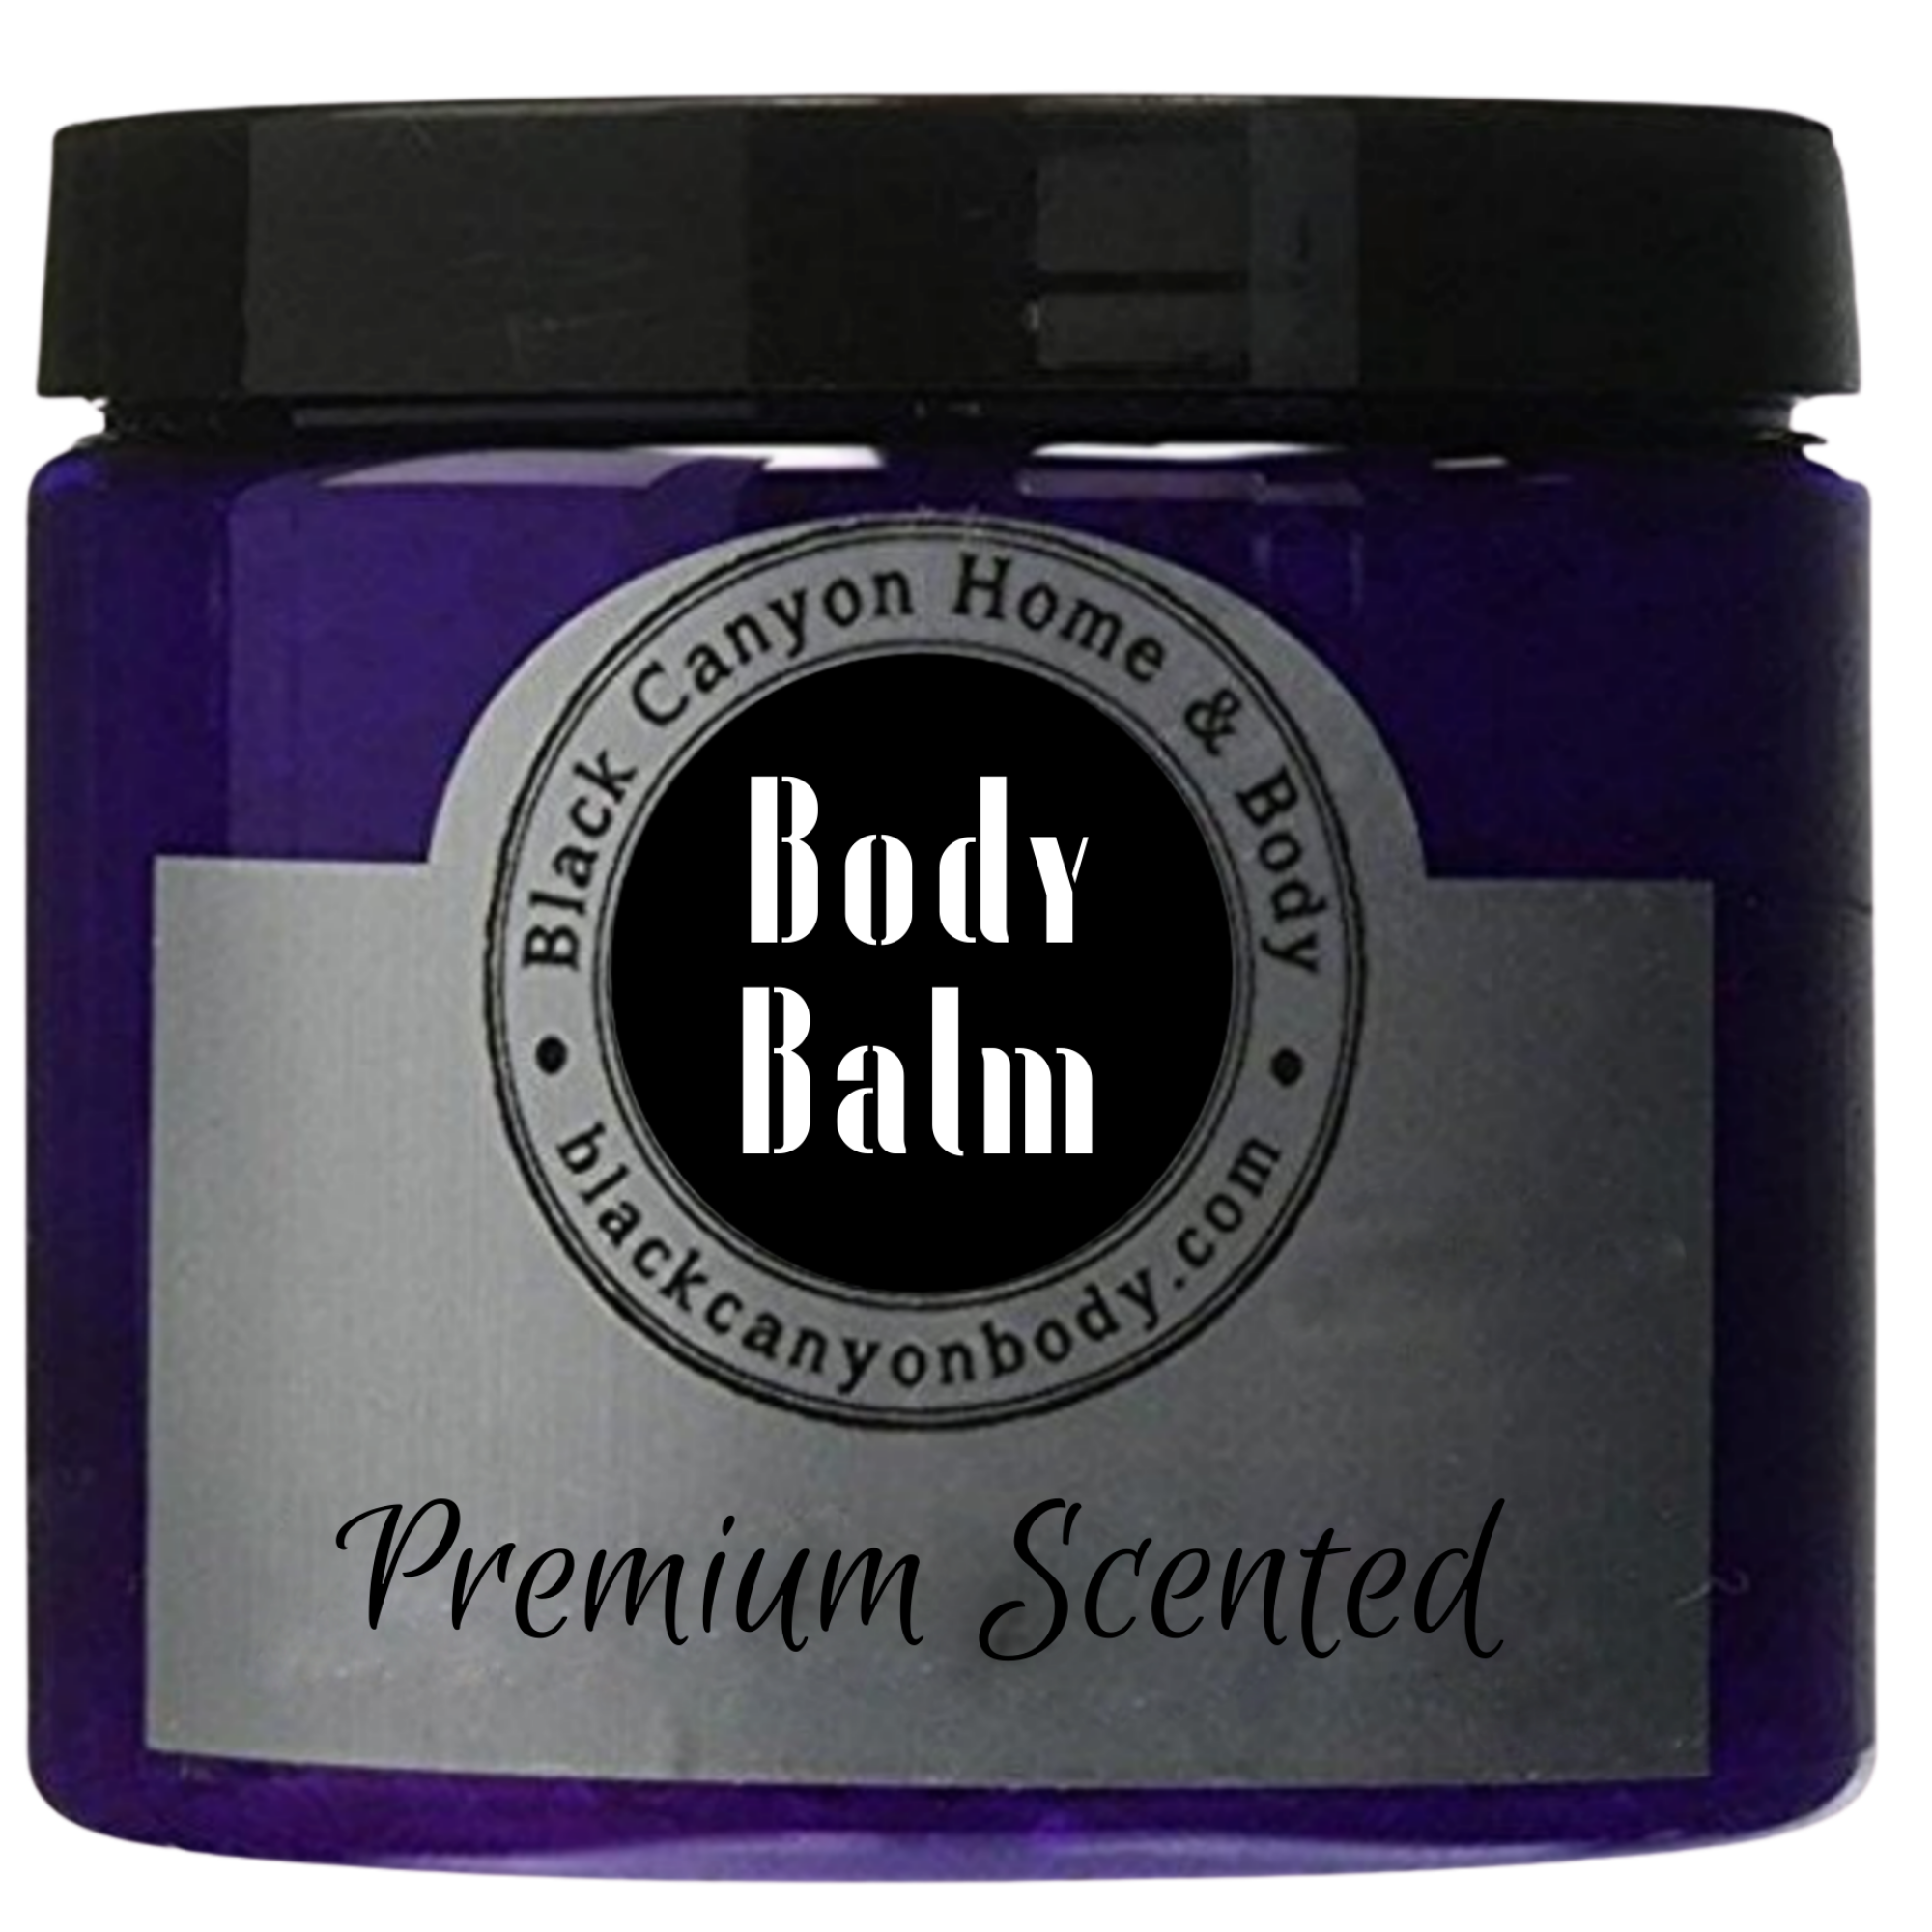 Black Canyon Bergamot Fig & Walnut Scented Natural Body Balm with Shea